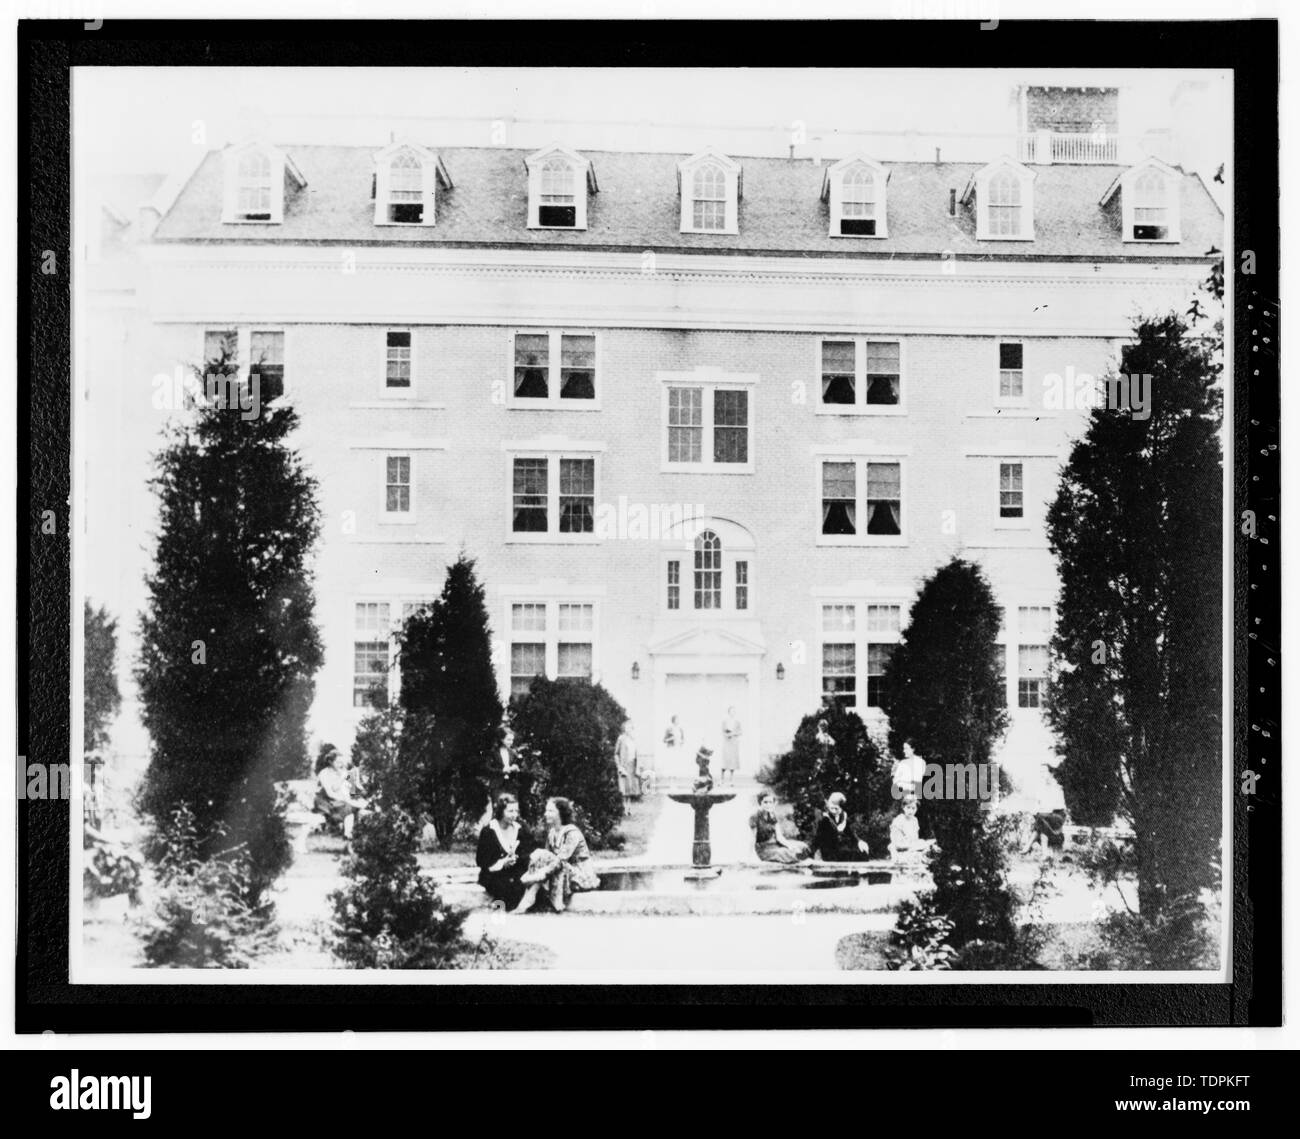 ca. 1930 (original print on file at U.S. Army Intelligence Security Command, Fort Belvoir, Virginia). VIEW TO NORTH OF SOUTH REAR OF MAIN BUILDING OF ARLINGTON HALL JUNIOR COLLEGE. - Arlington Hall Station, Main Building, 4000 Arlington Boulevard, Arlington, Arlington County, VA; VanDyke, Tina, transmitter Stock Photo